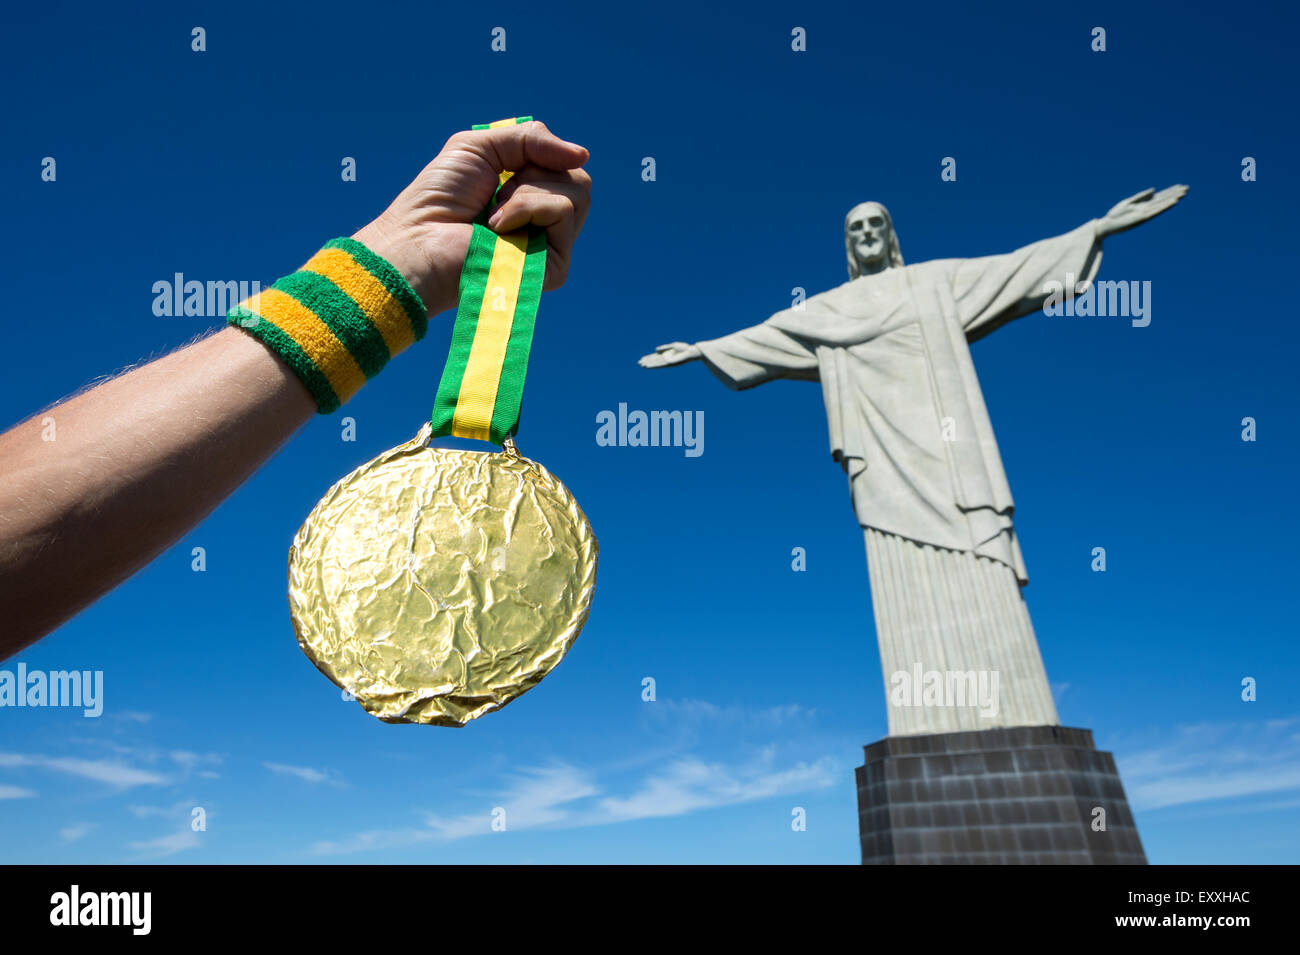 RIO DE JANEIRO, BRAZIL - MARCH 05, 2015: Hand holds gold medal hanging from Brazil color ribbons in clear blue sky at Corcovado. Stock Photo